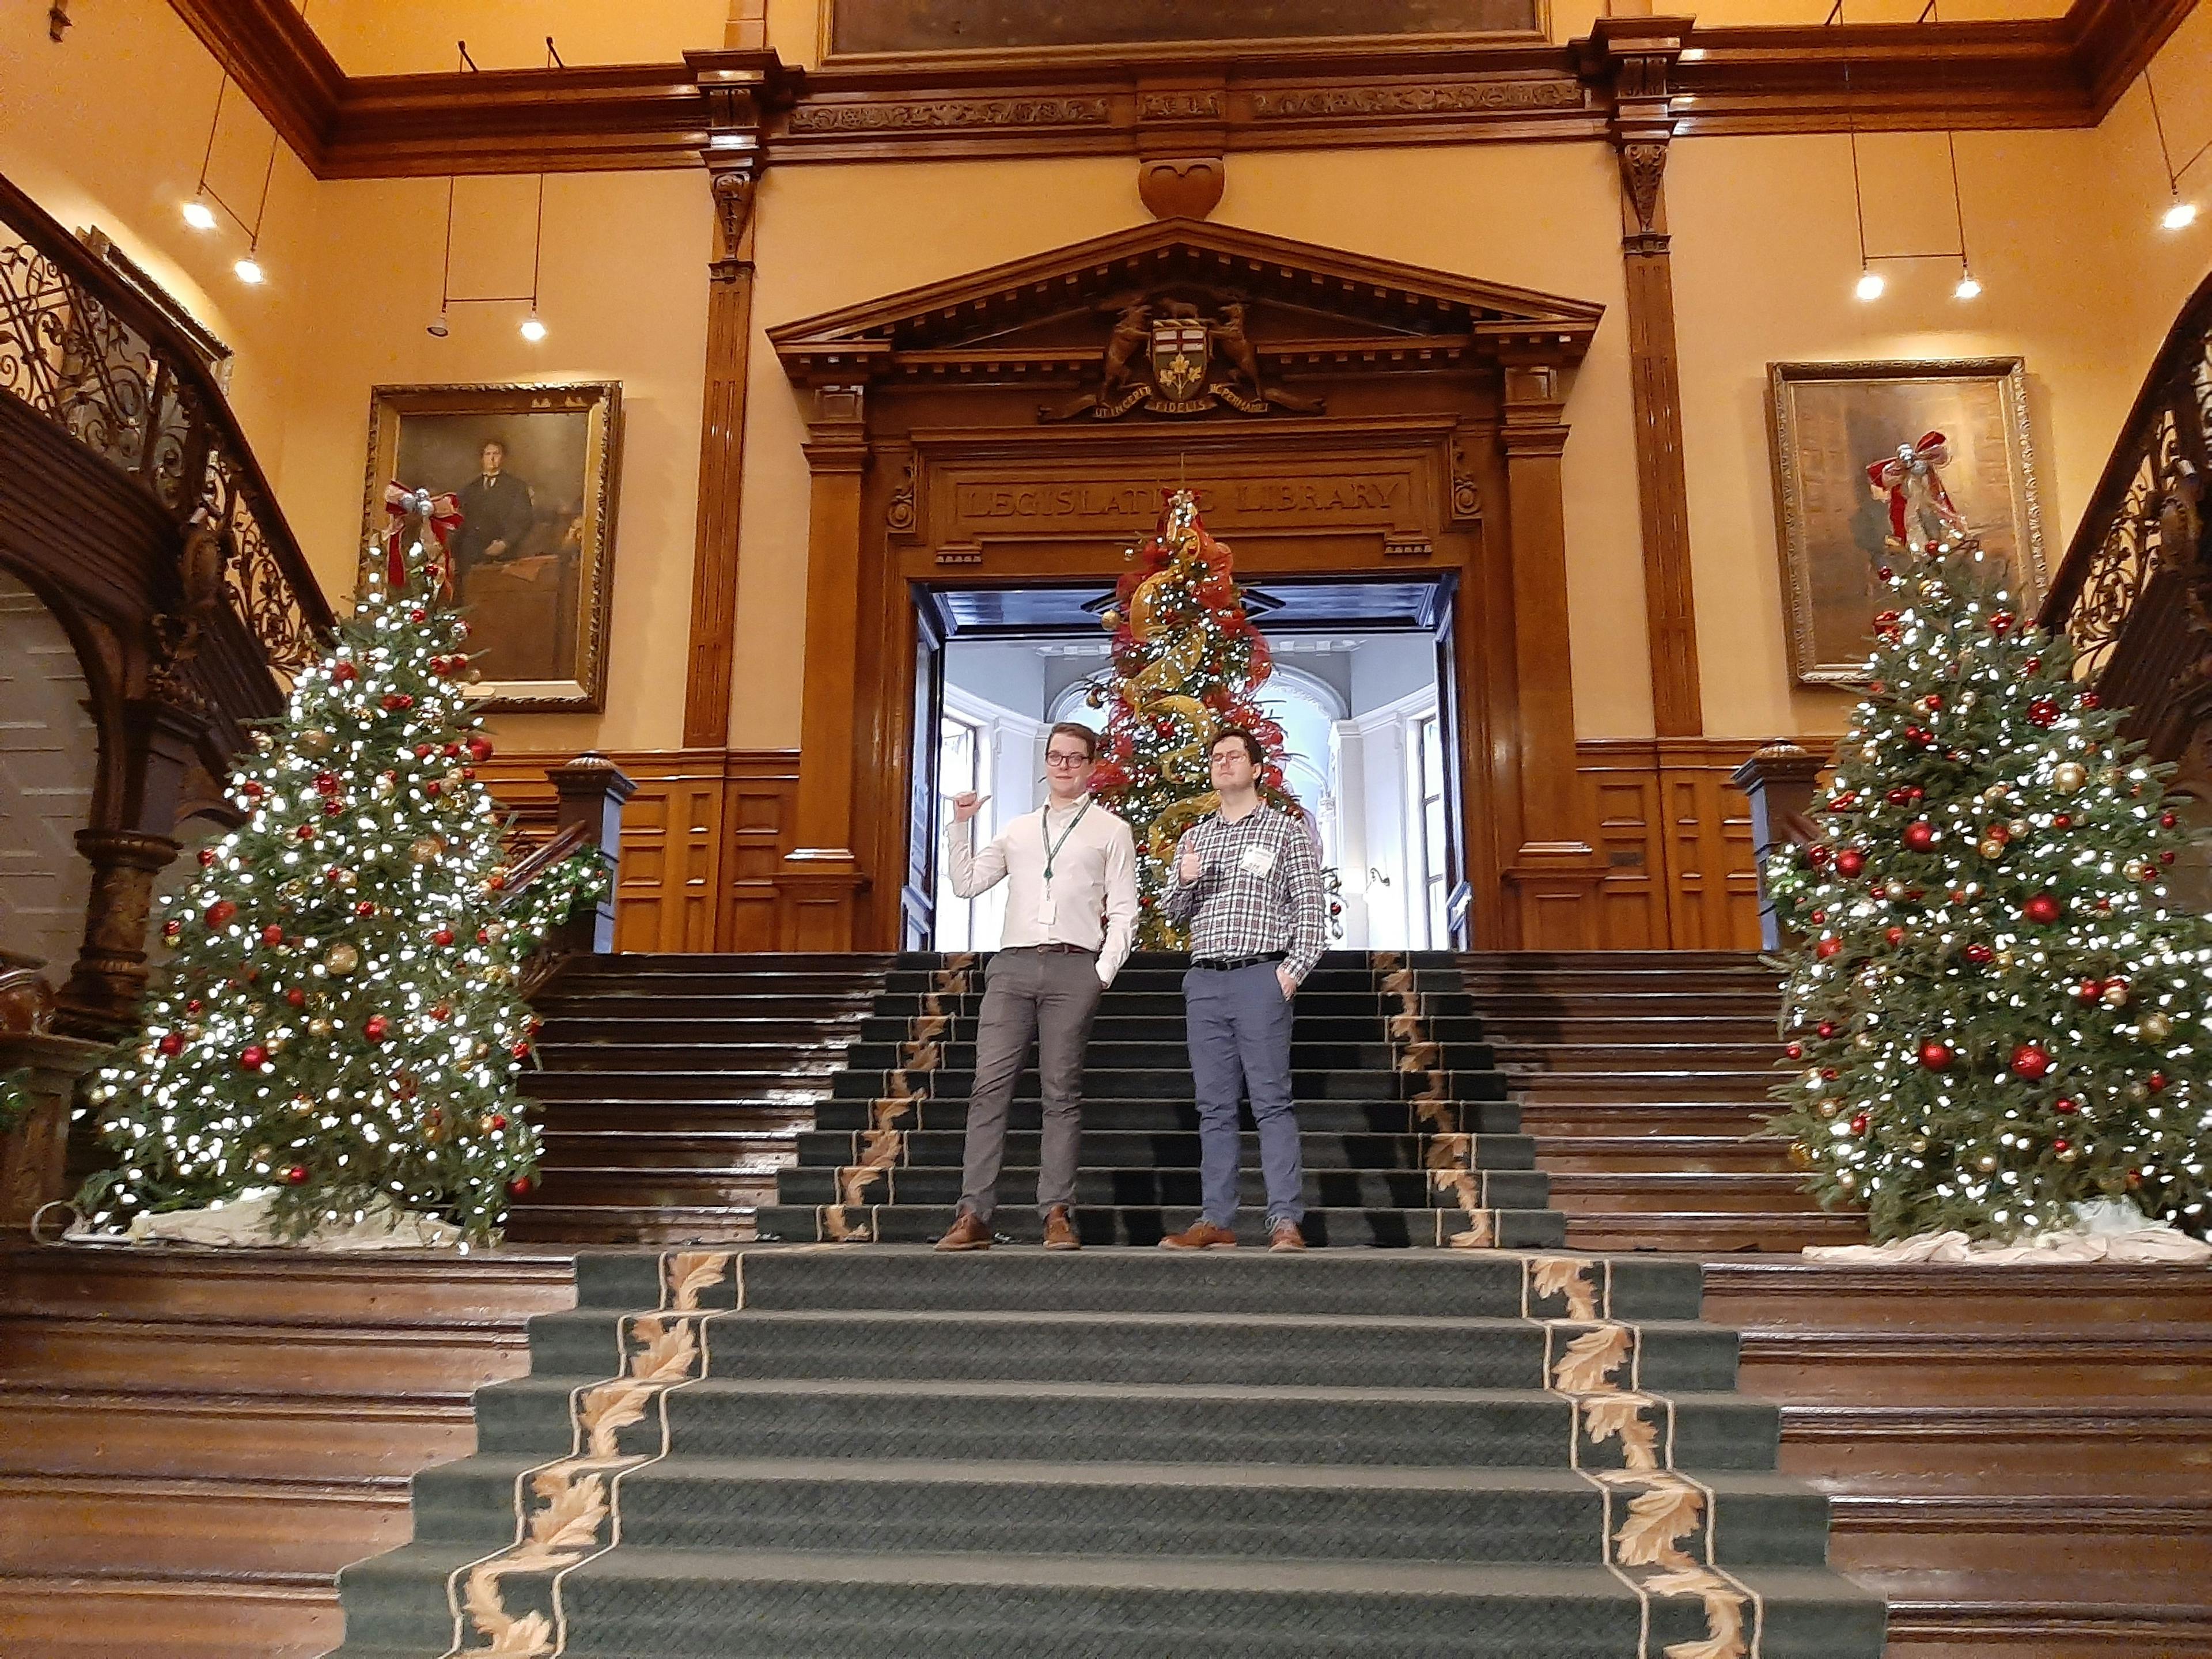 Ranking the leaders’ 2019 Queen’s Park Christmas trees